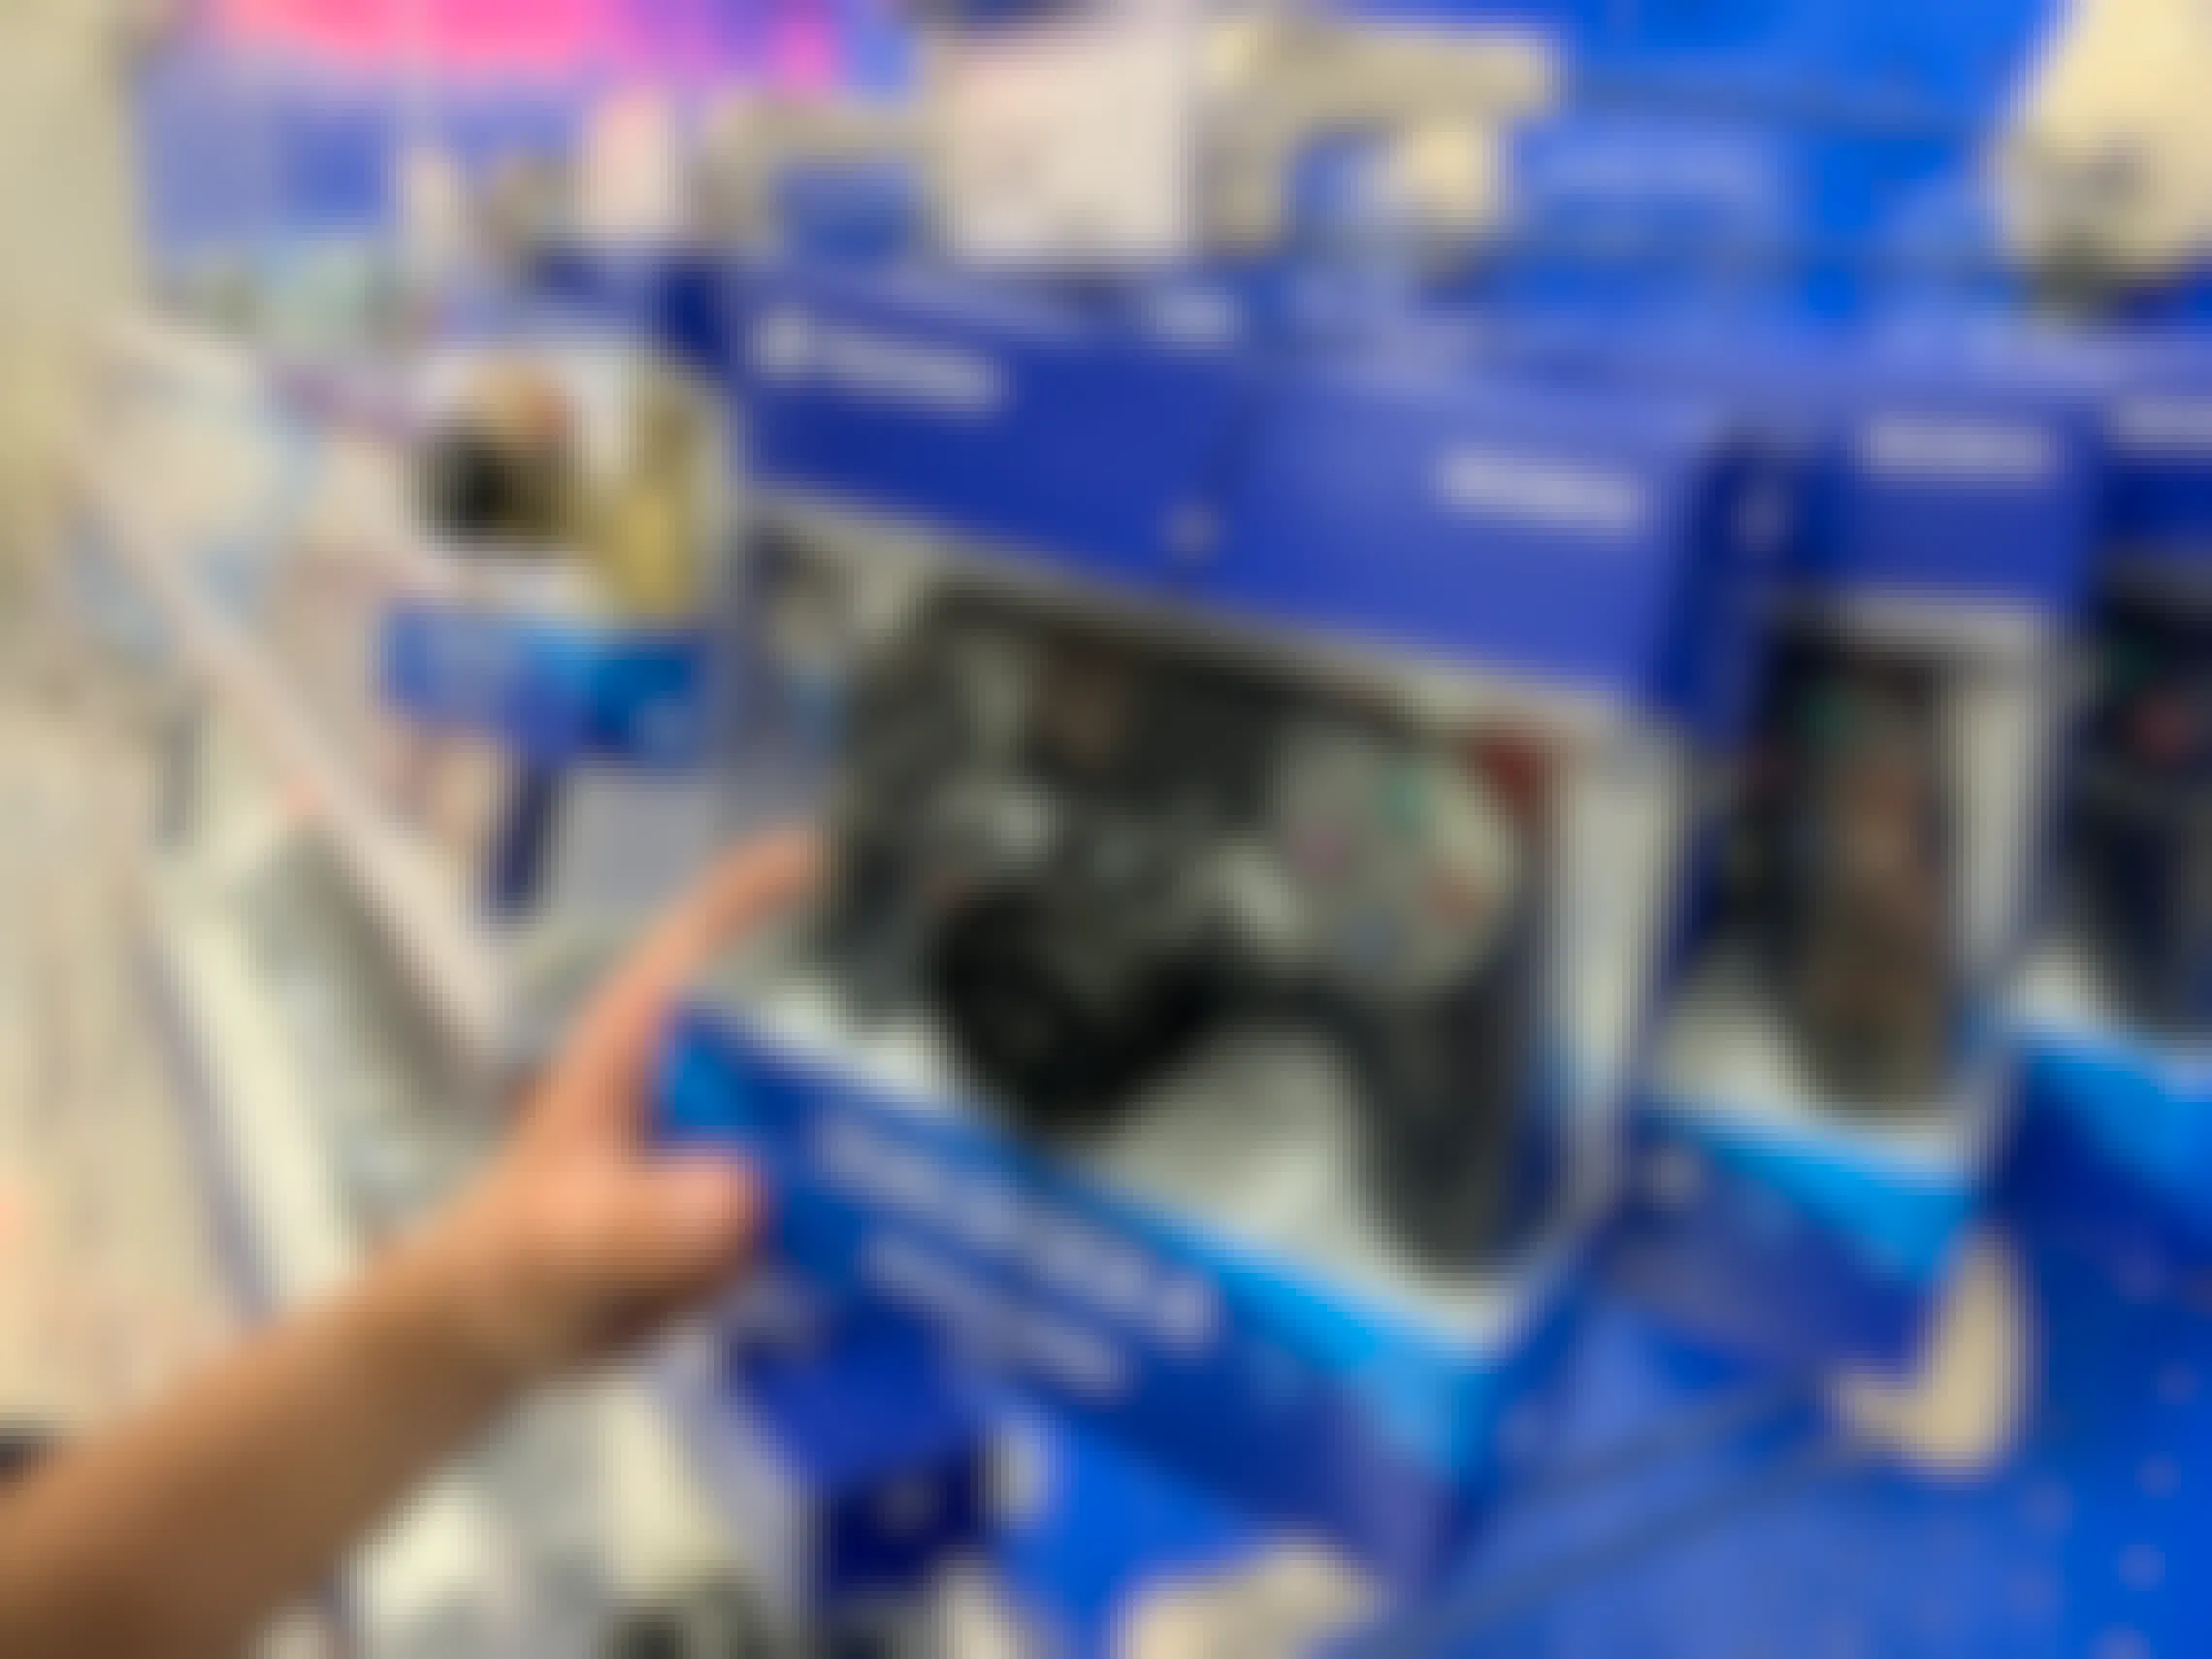 A person's hand taking a packaged PS4 controller from the shelf at Target.